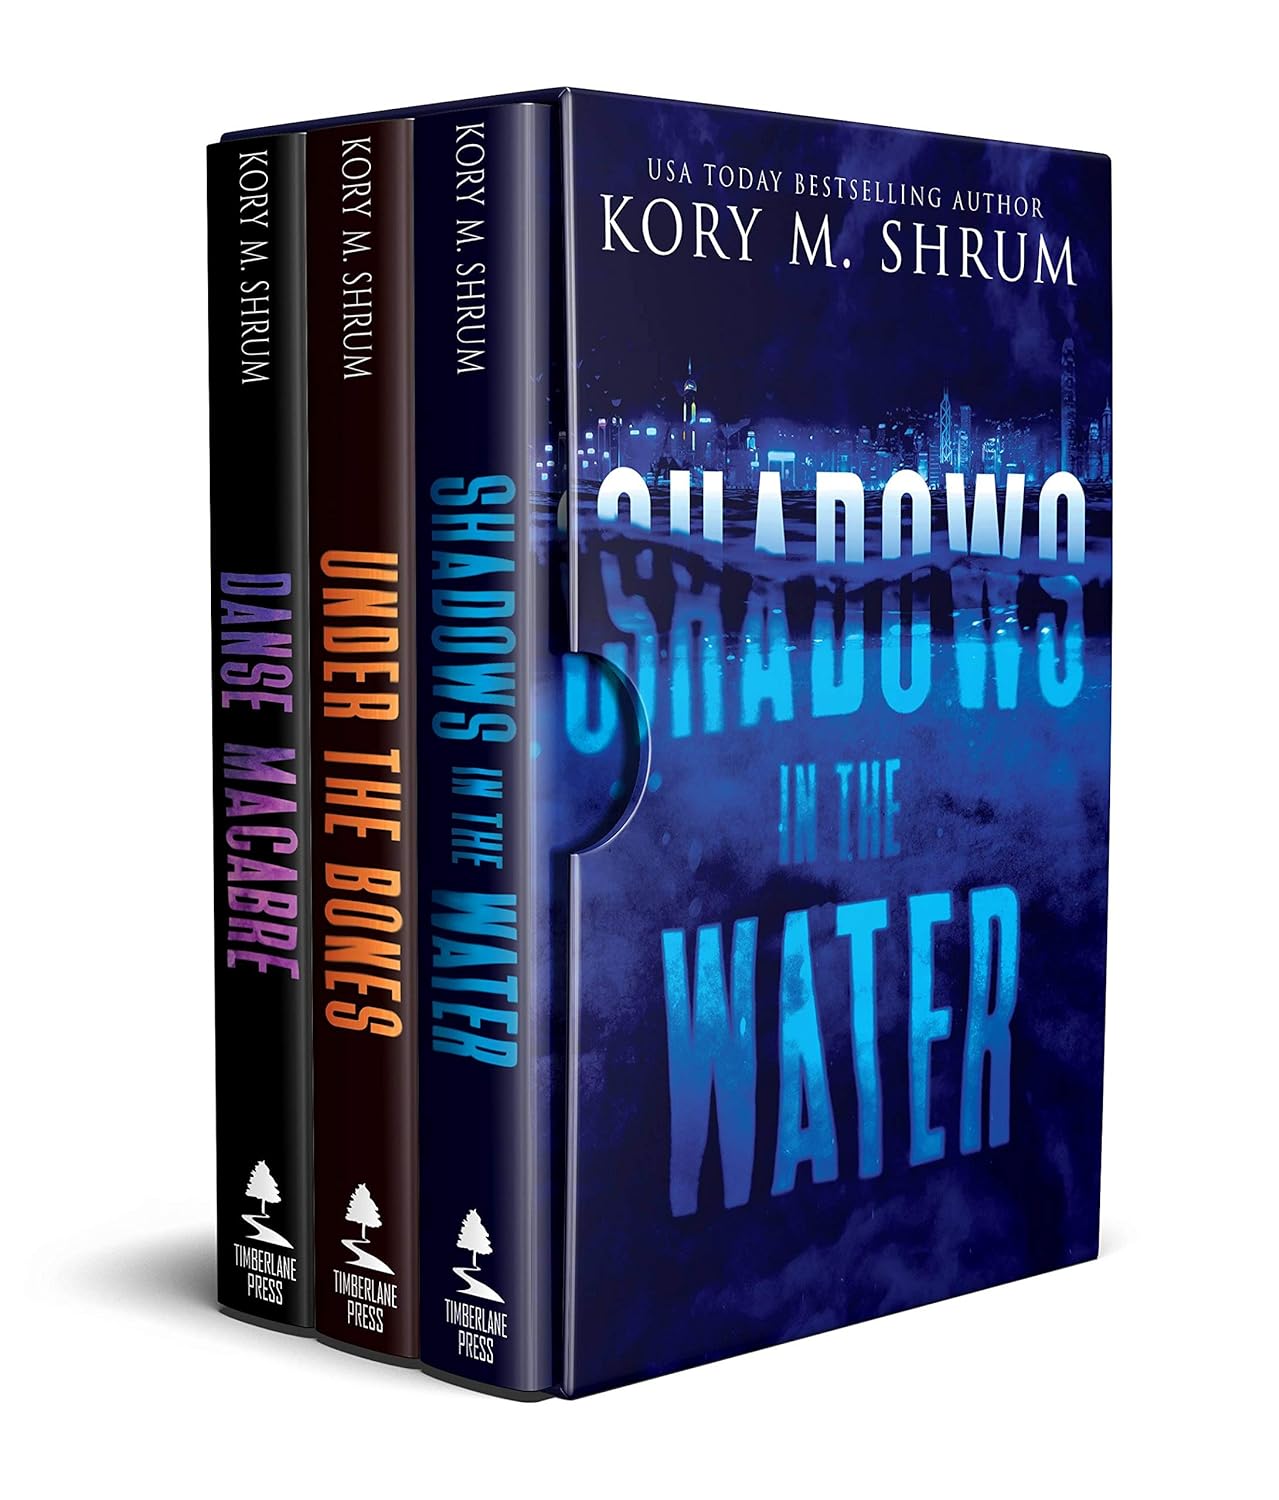 Shadows in the Water Series: Books 1, 2 and 3 are free on Amazon Kindle